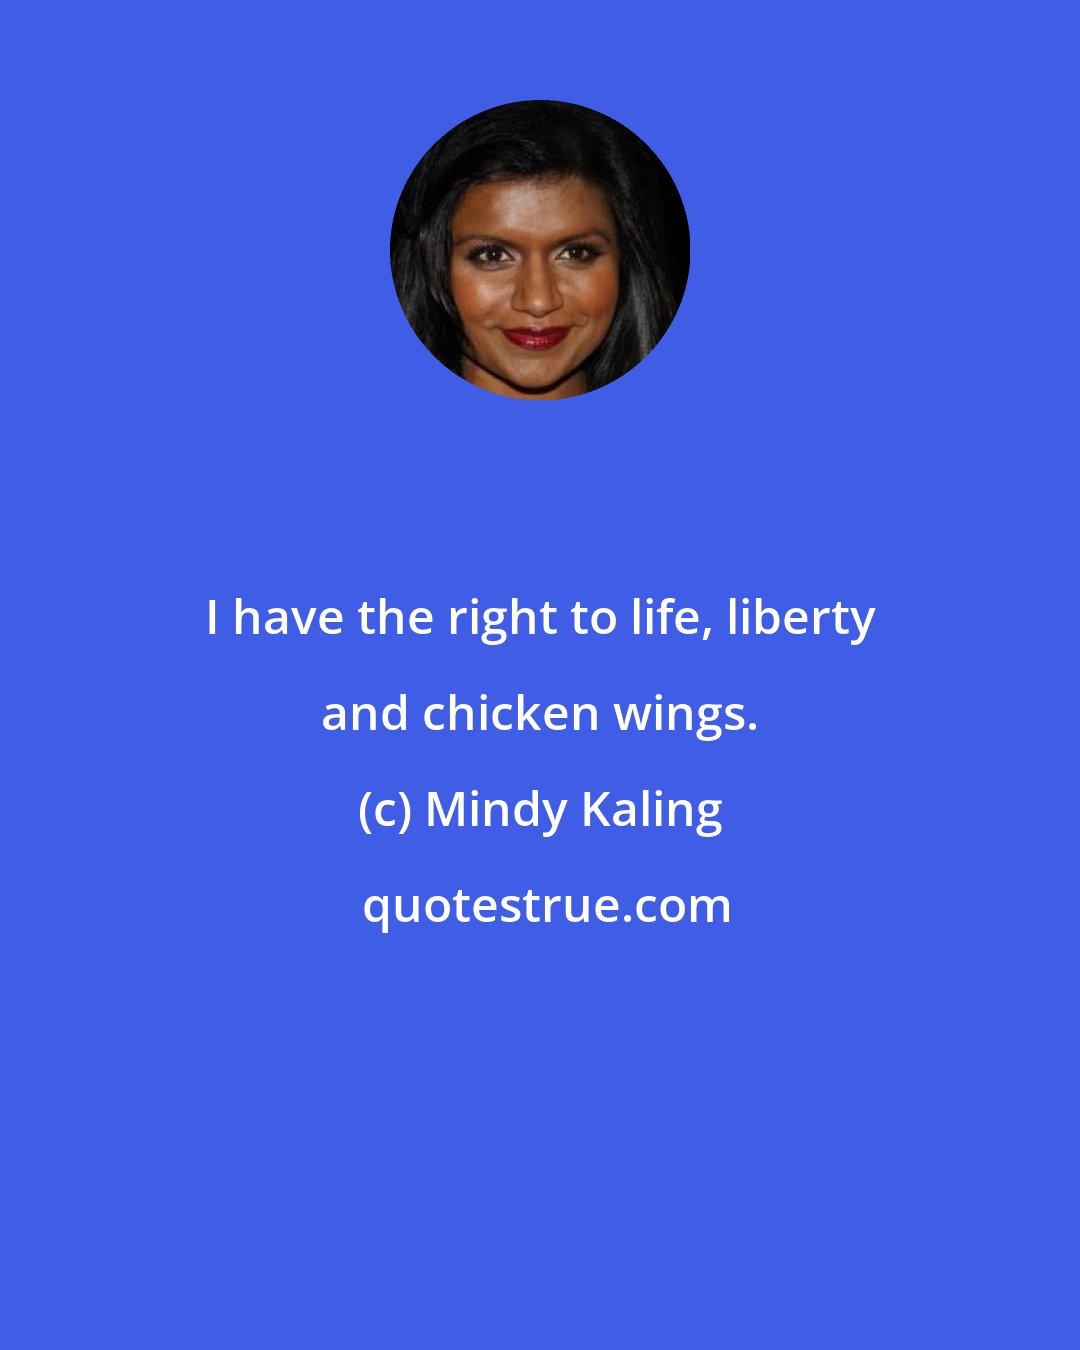 Mindy Kaling: I have the right to life, liberty and chicken wings.